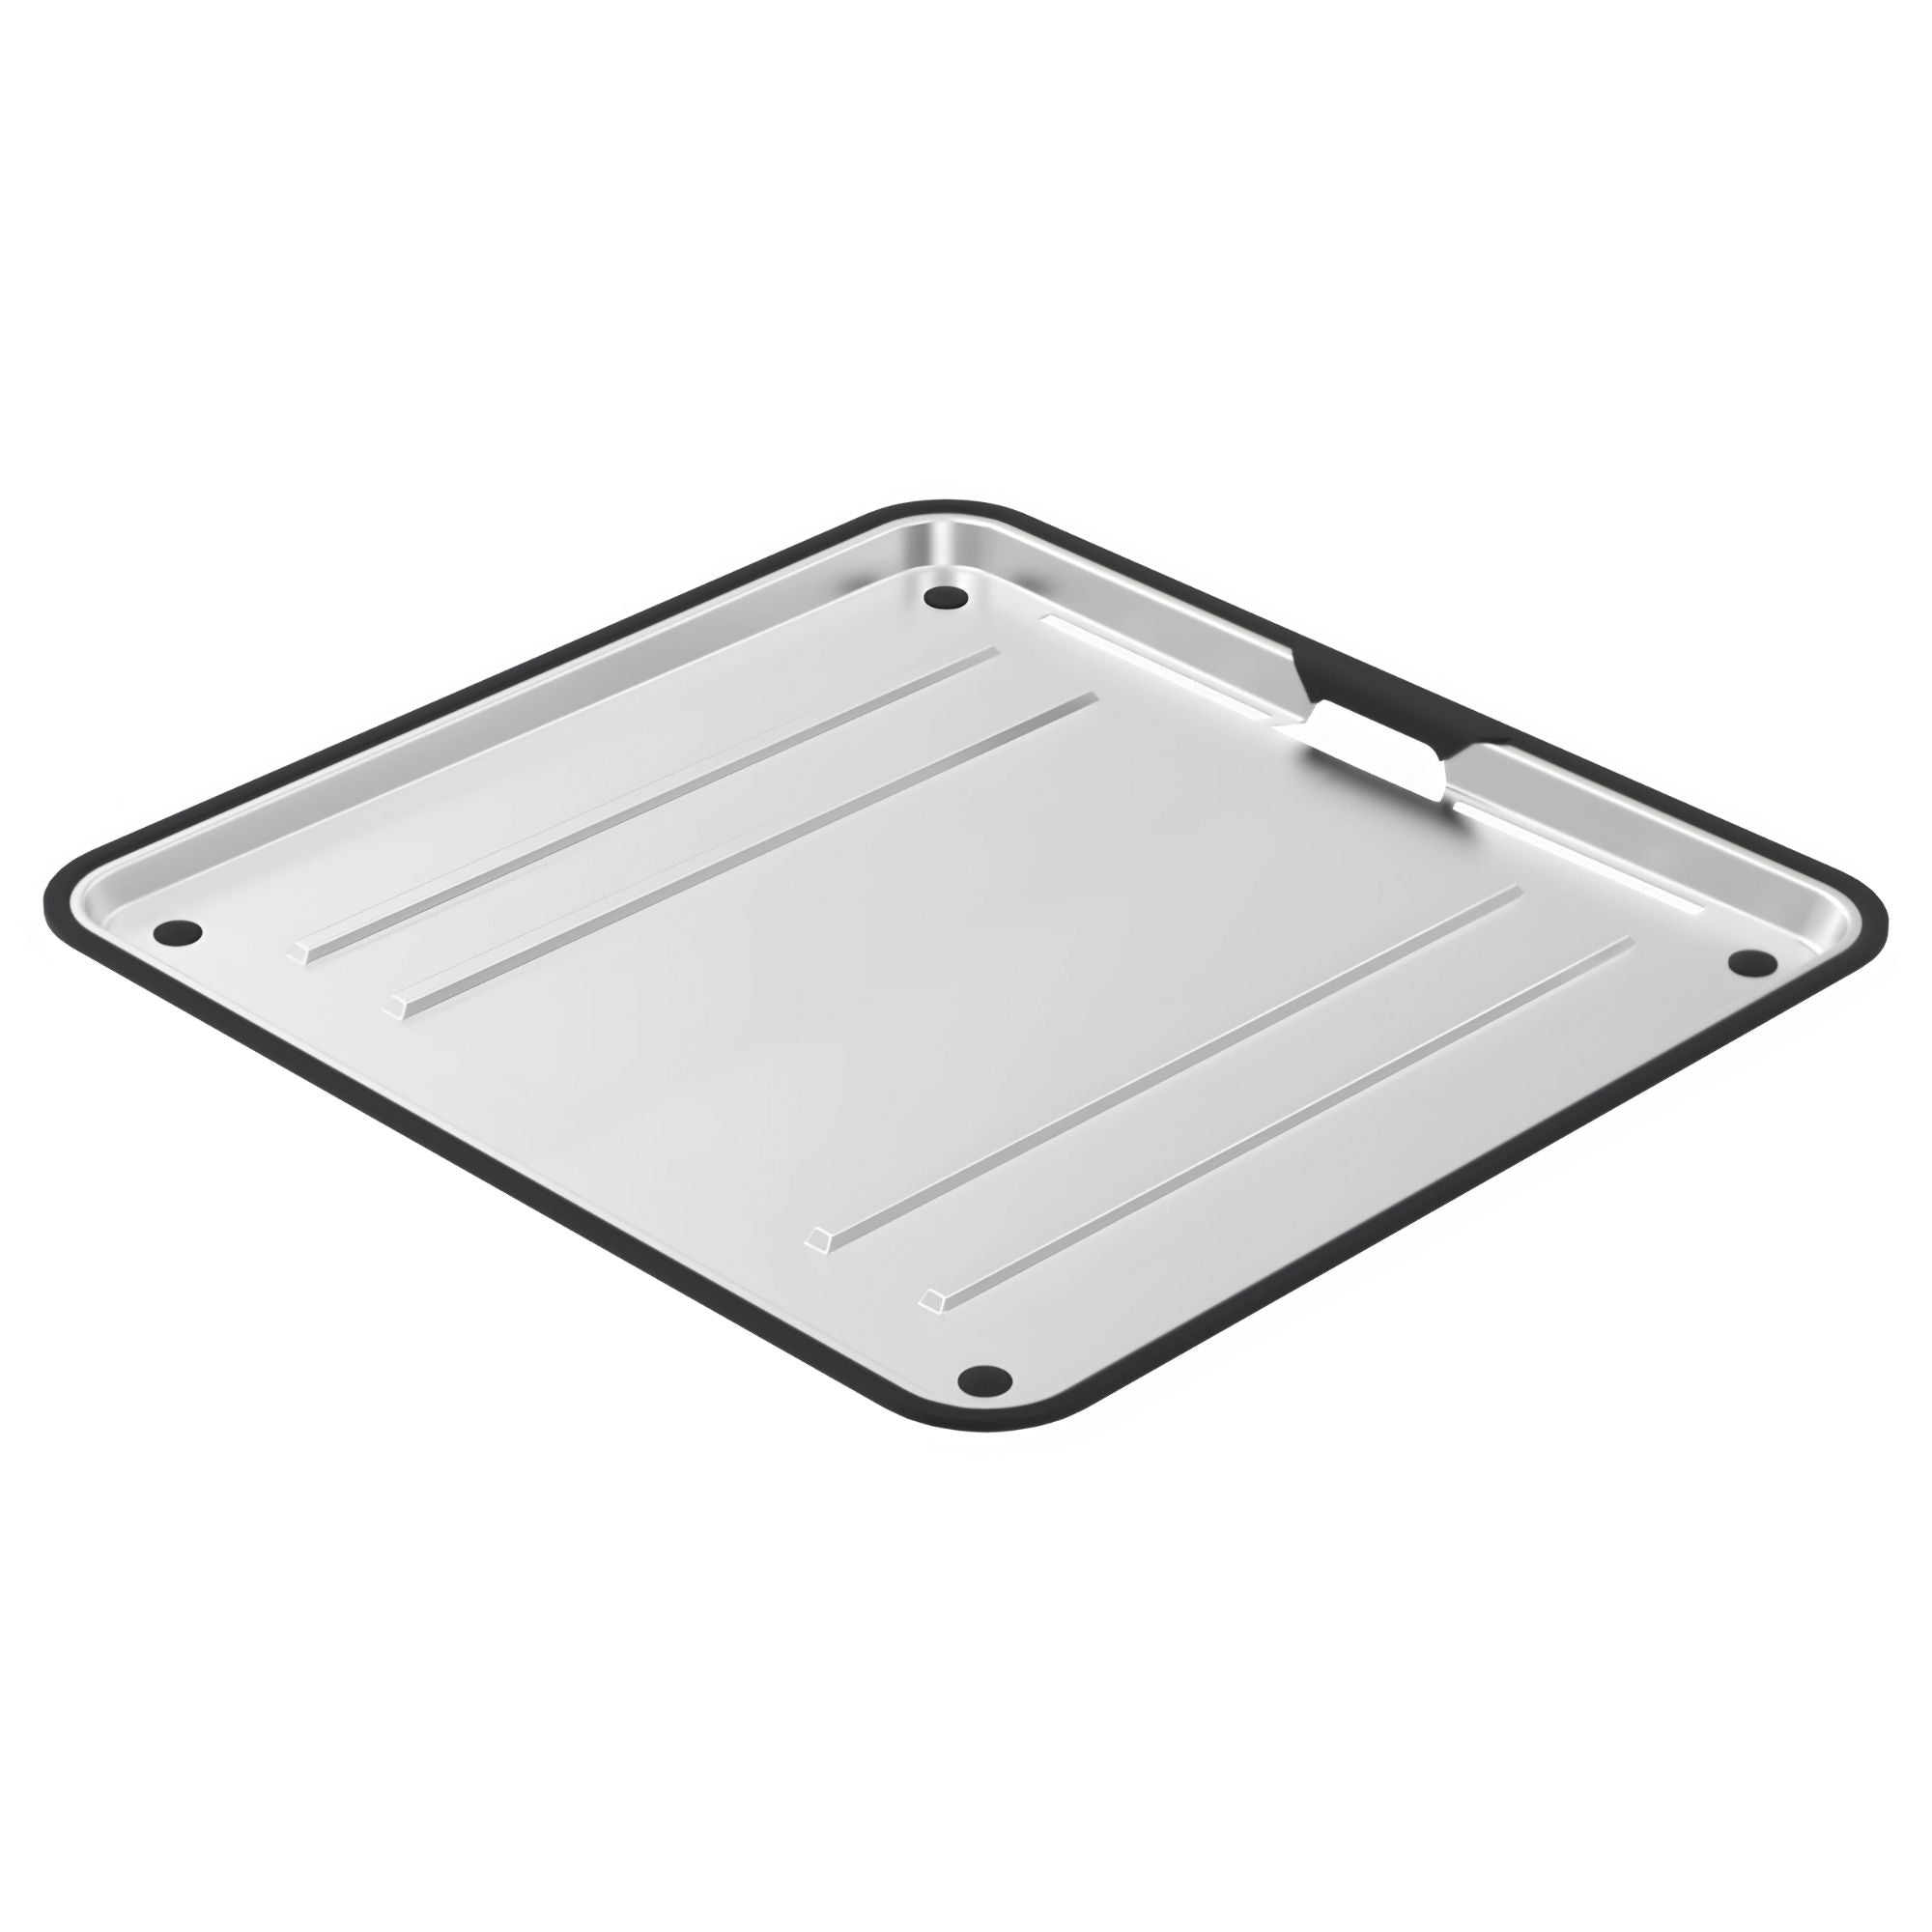 ABEY LAGO 1 & 1/3 DOUBLE BOWL KITCHEN SINK STAINLESS STEEL 650MM